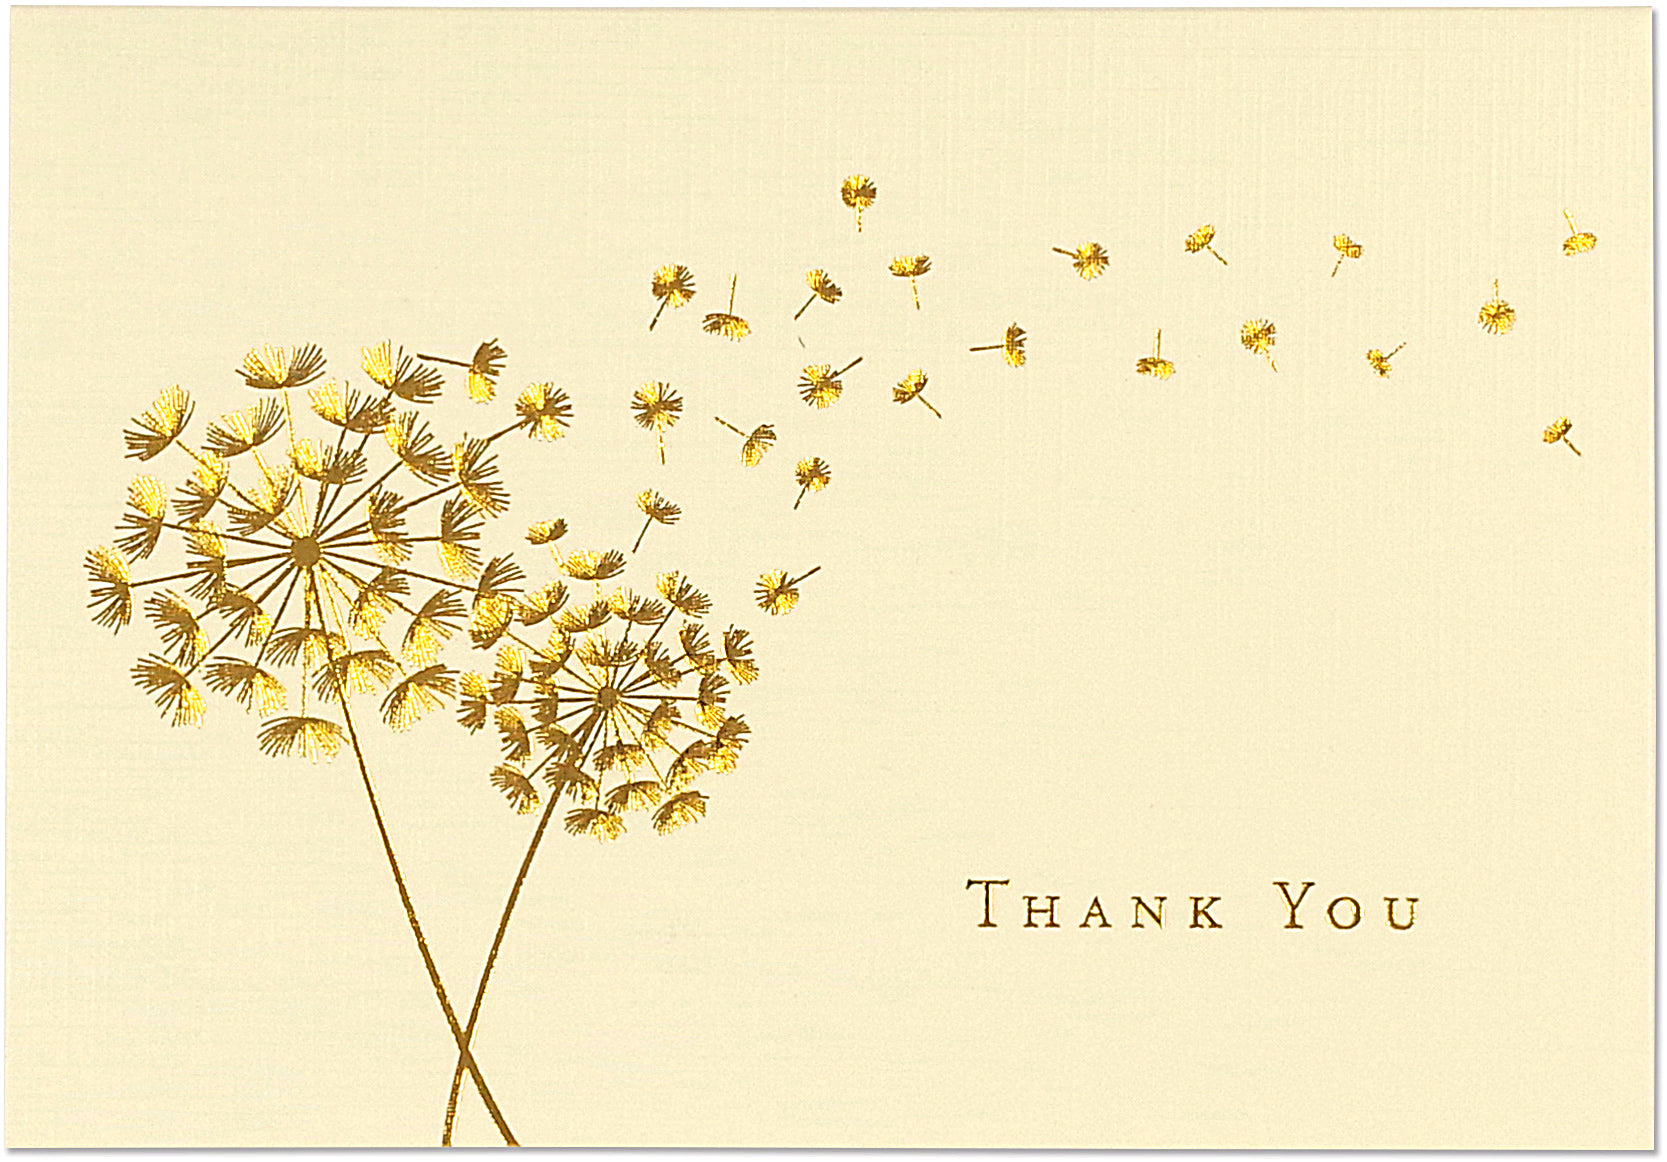 Boxed Thank You Cards - Dandelion Wishes    